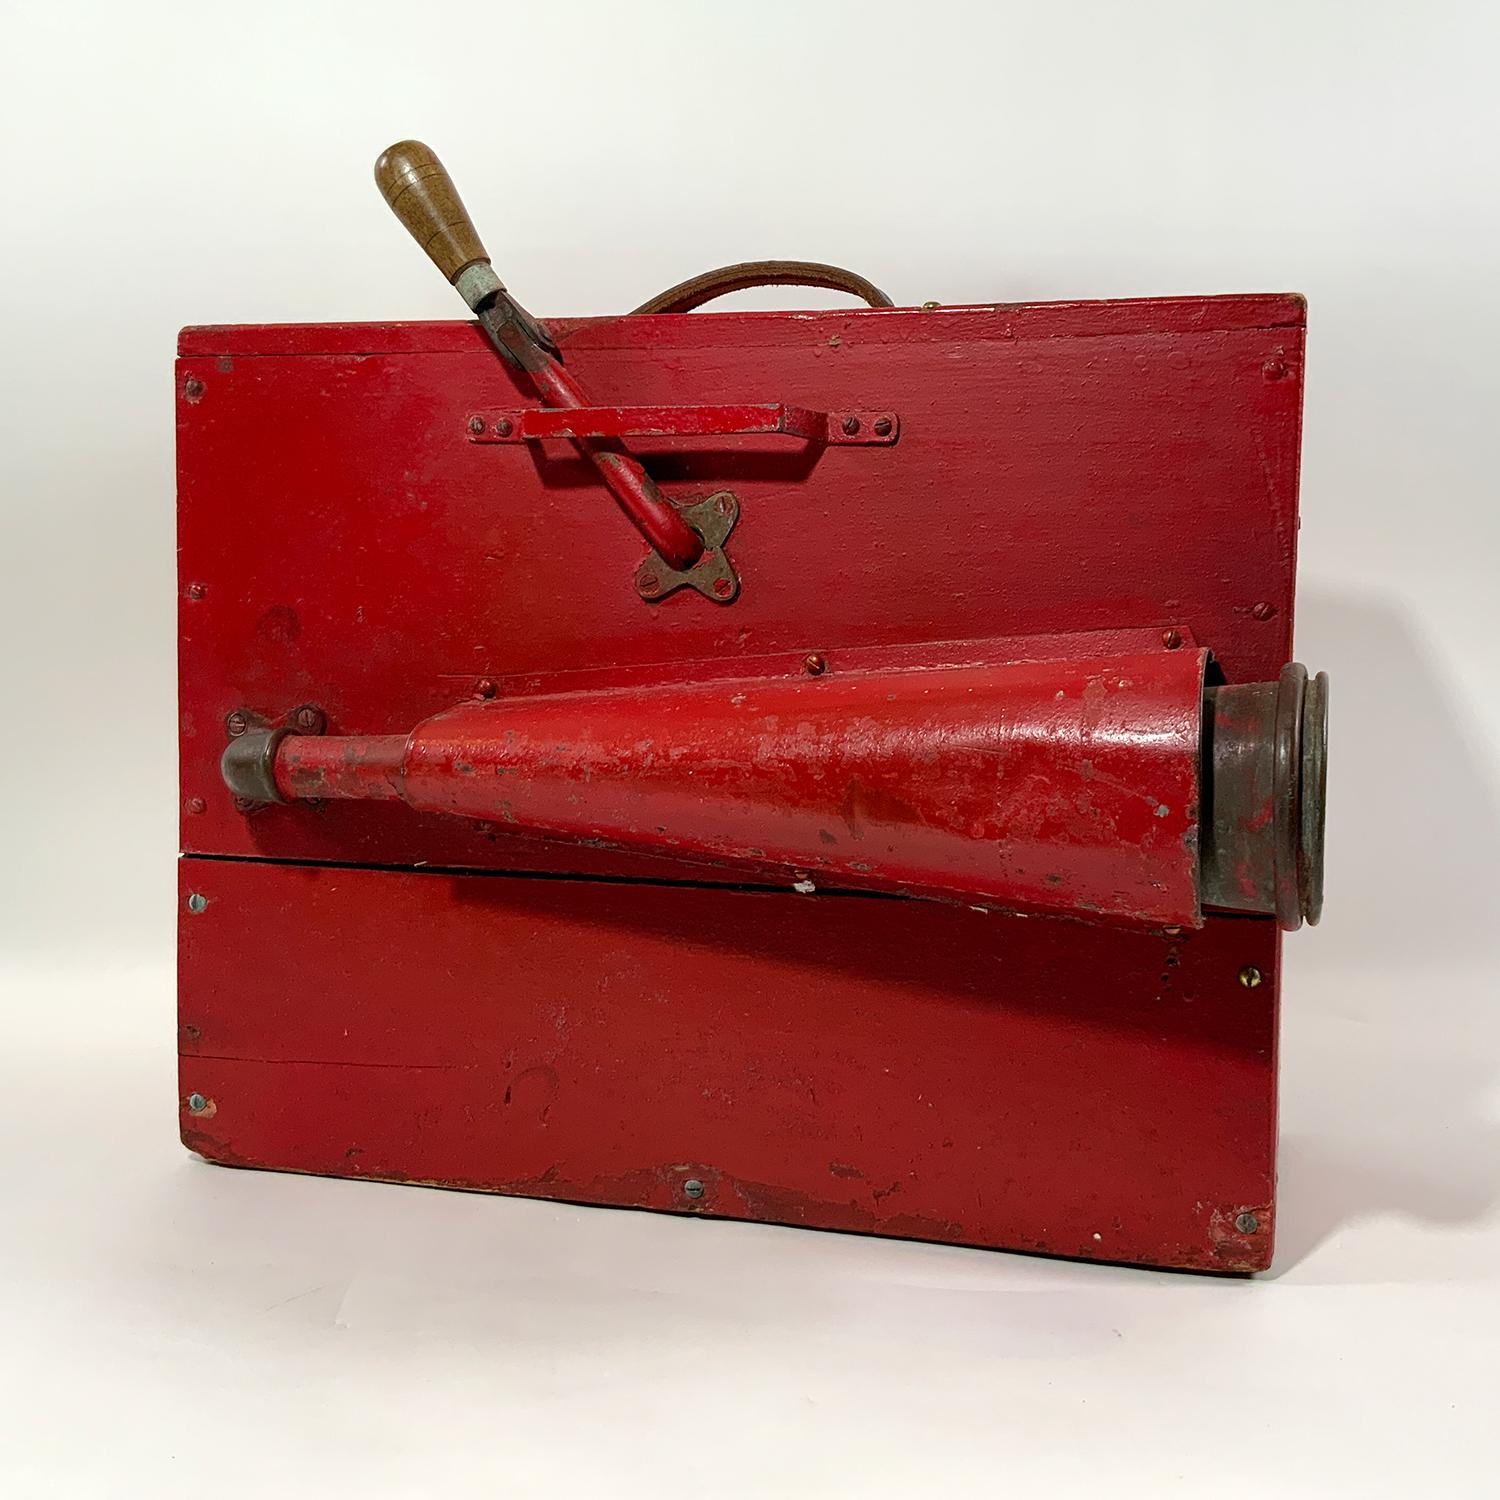 Unique crank operated foghorn with red painted timber box and pipe mounted trumpet, protected by a substantial metal shroud. Sturdy center carry handle. Very loud. Fabulous relic. The external horn with shroud makes this nautical antique quite a